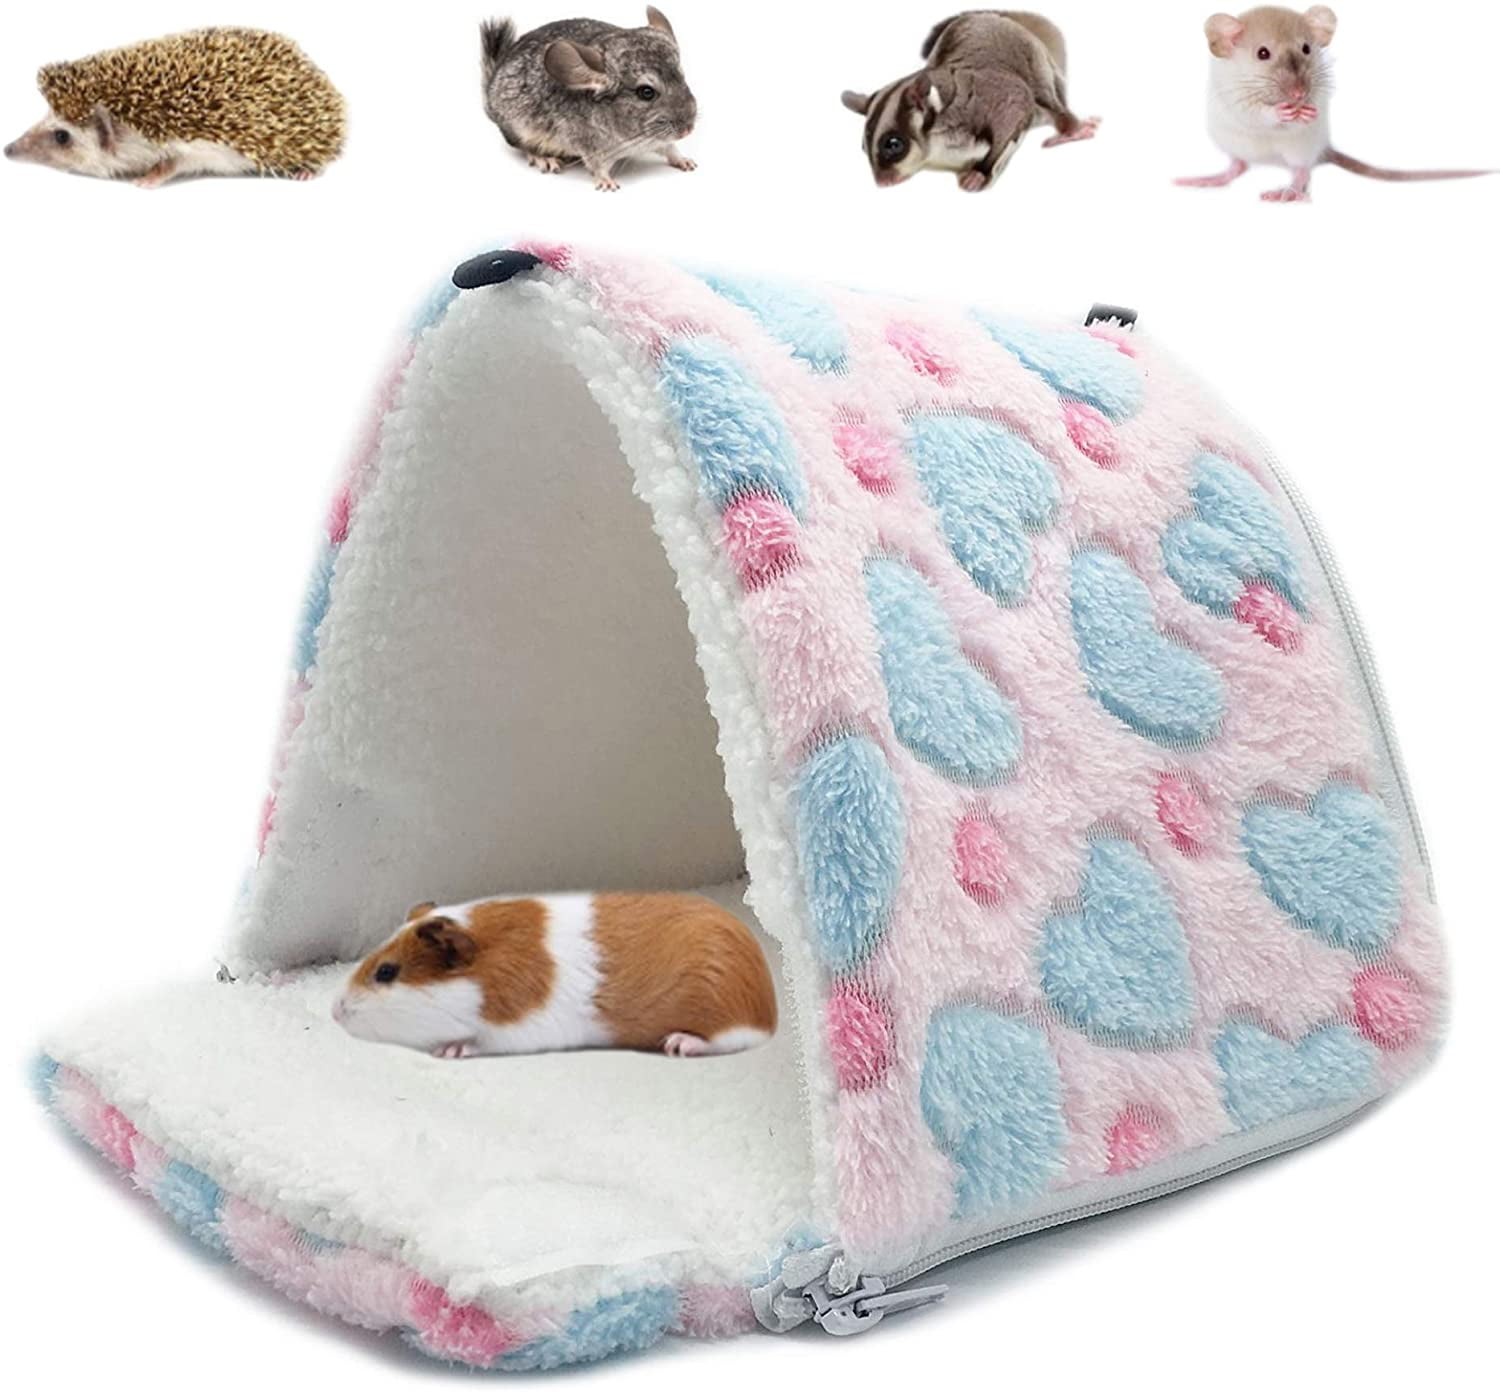 Hammock for Rabbit/Guinea Pig/Ferret/Small Animals Hanging Bed Toy House Cage 